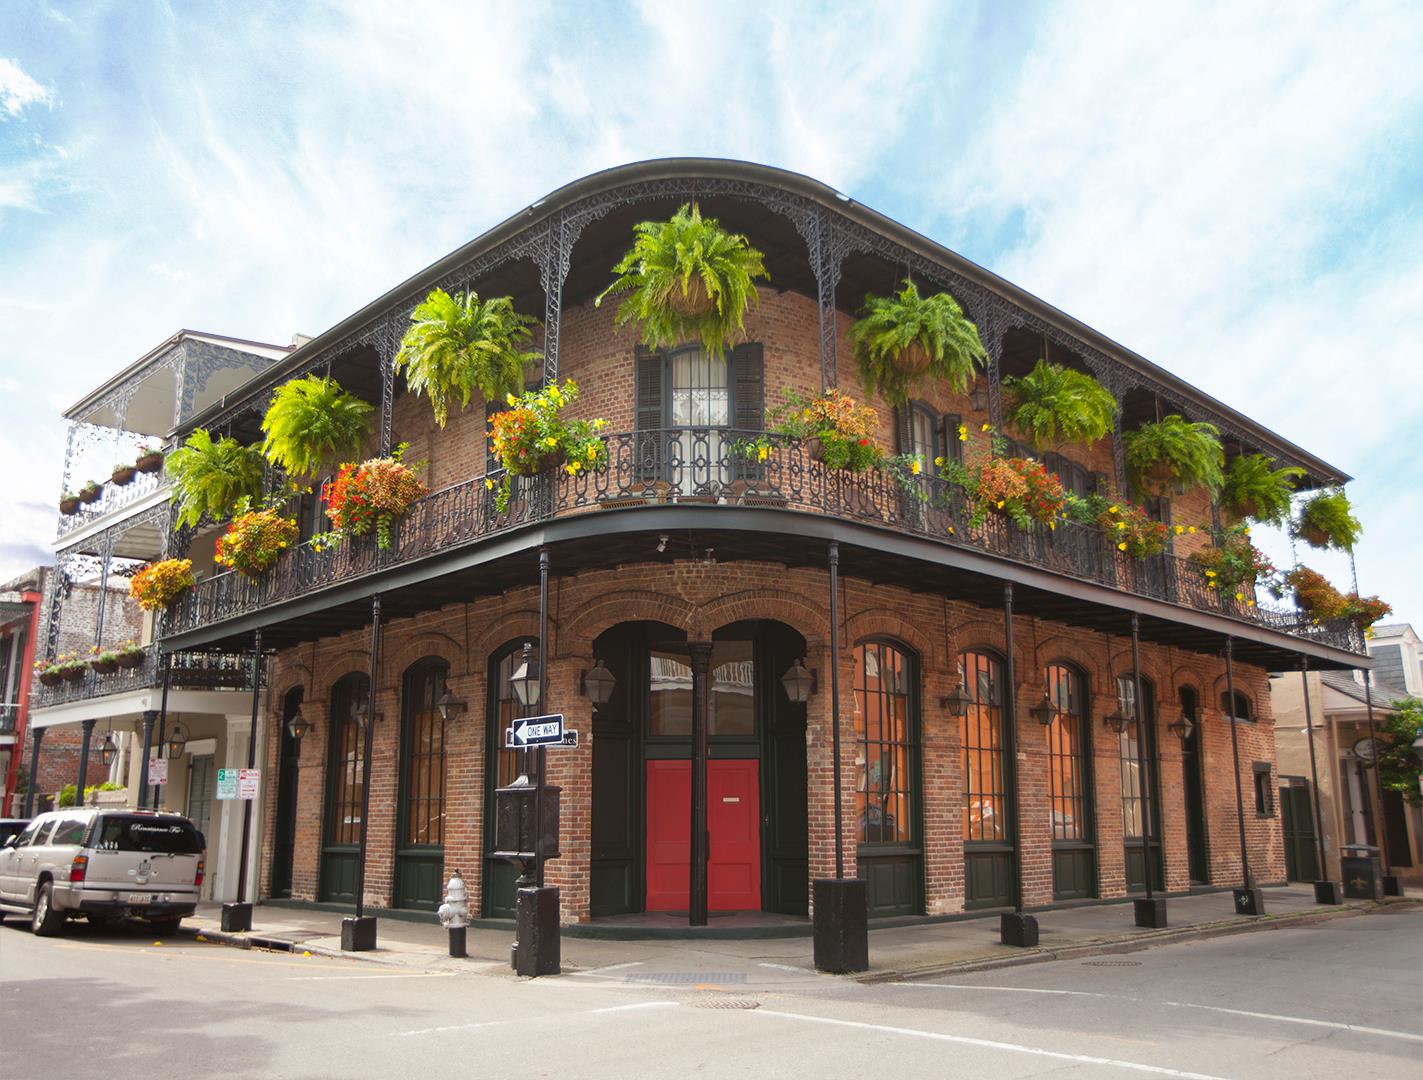 Perfect 3 Day New Orleans Weekend Guide – Resist the Mundane